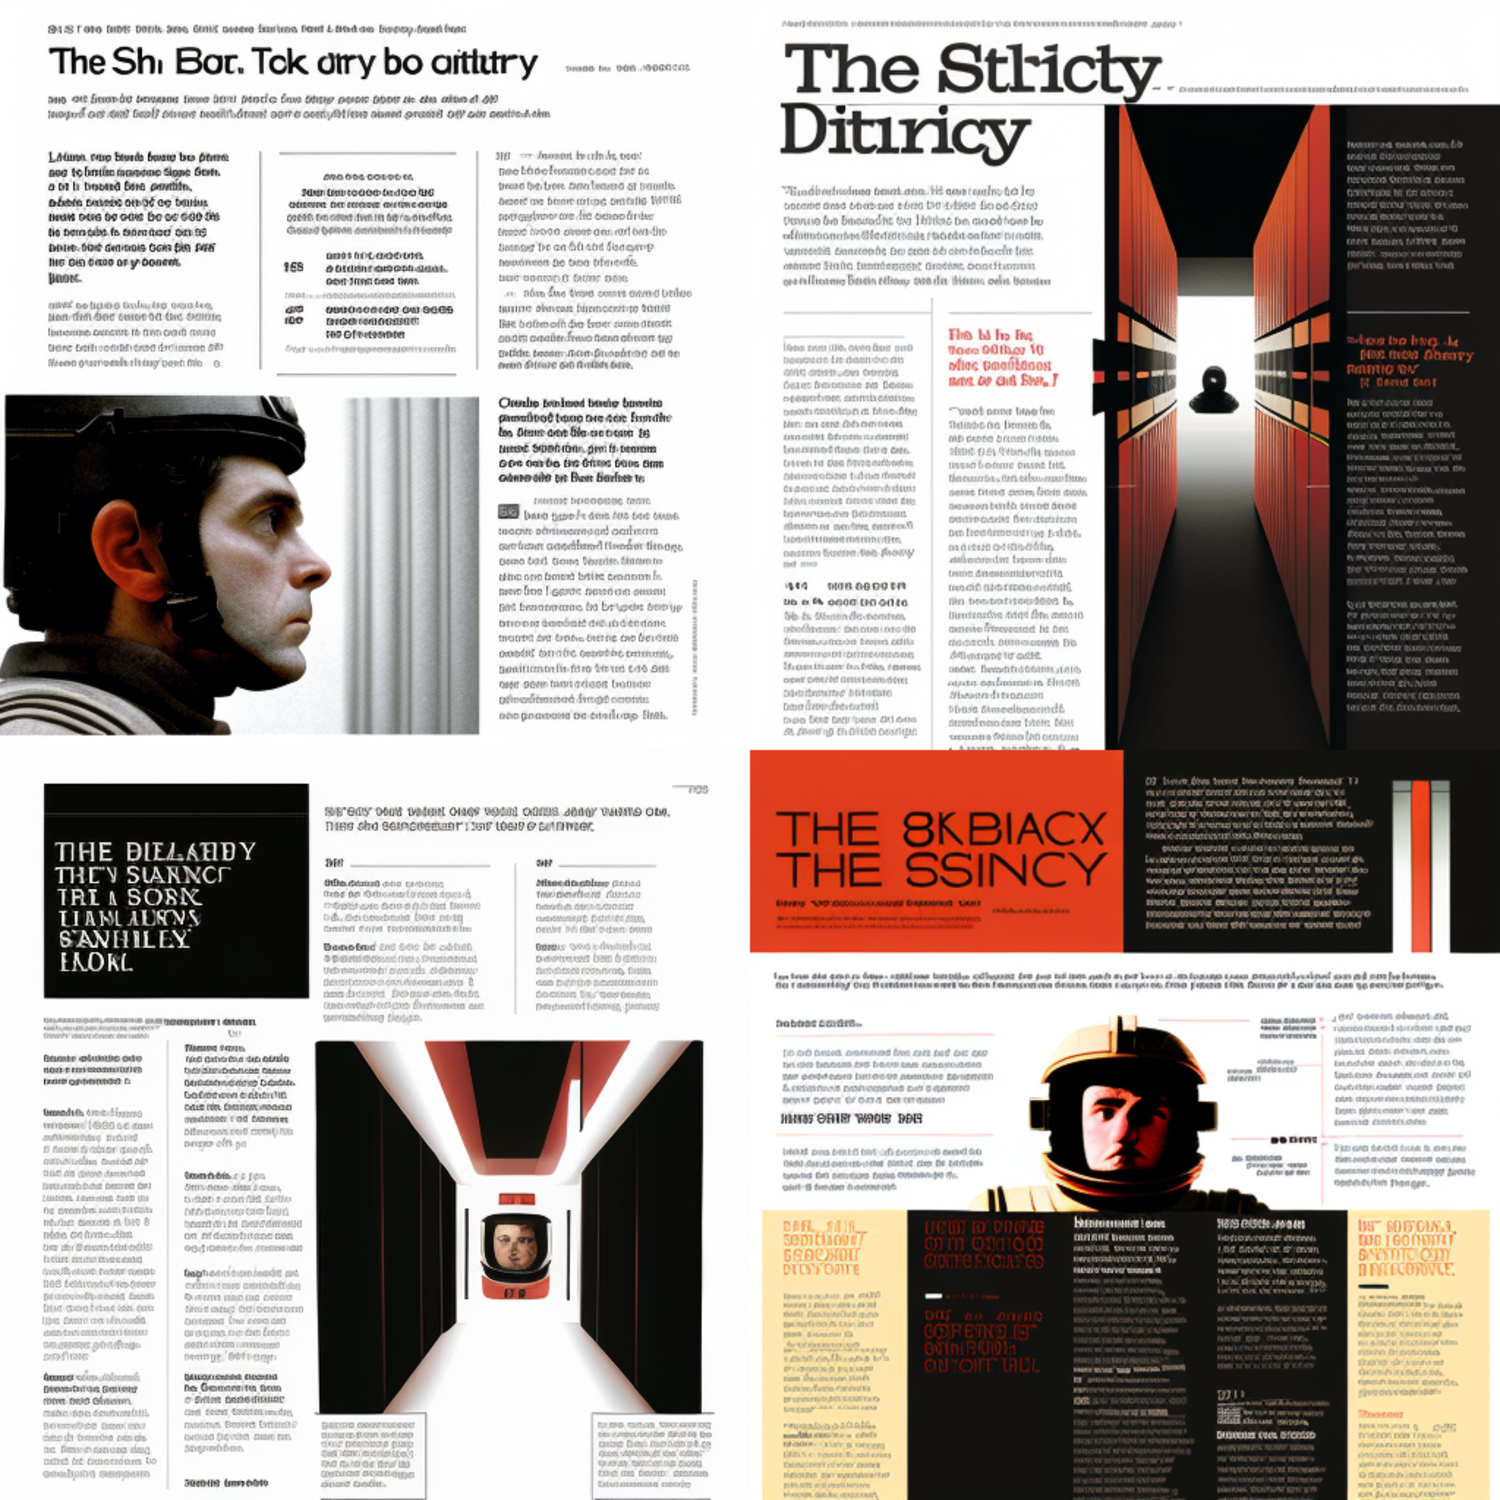 An imagined blog layout by Stanley Kubrick